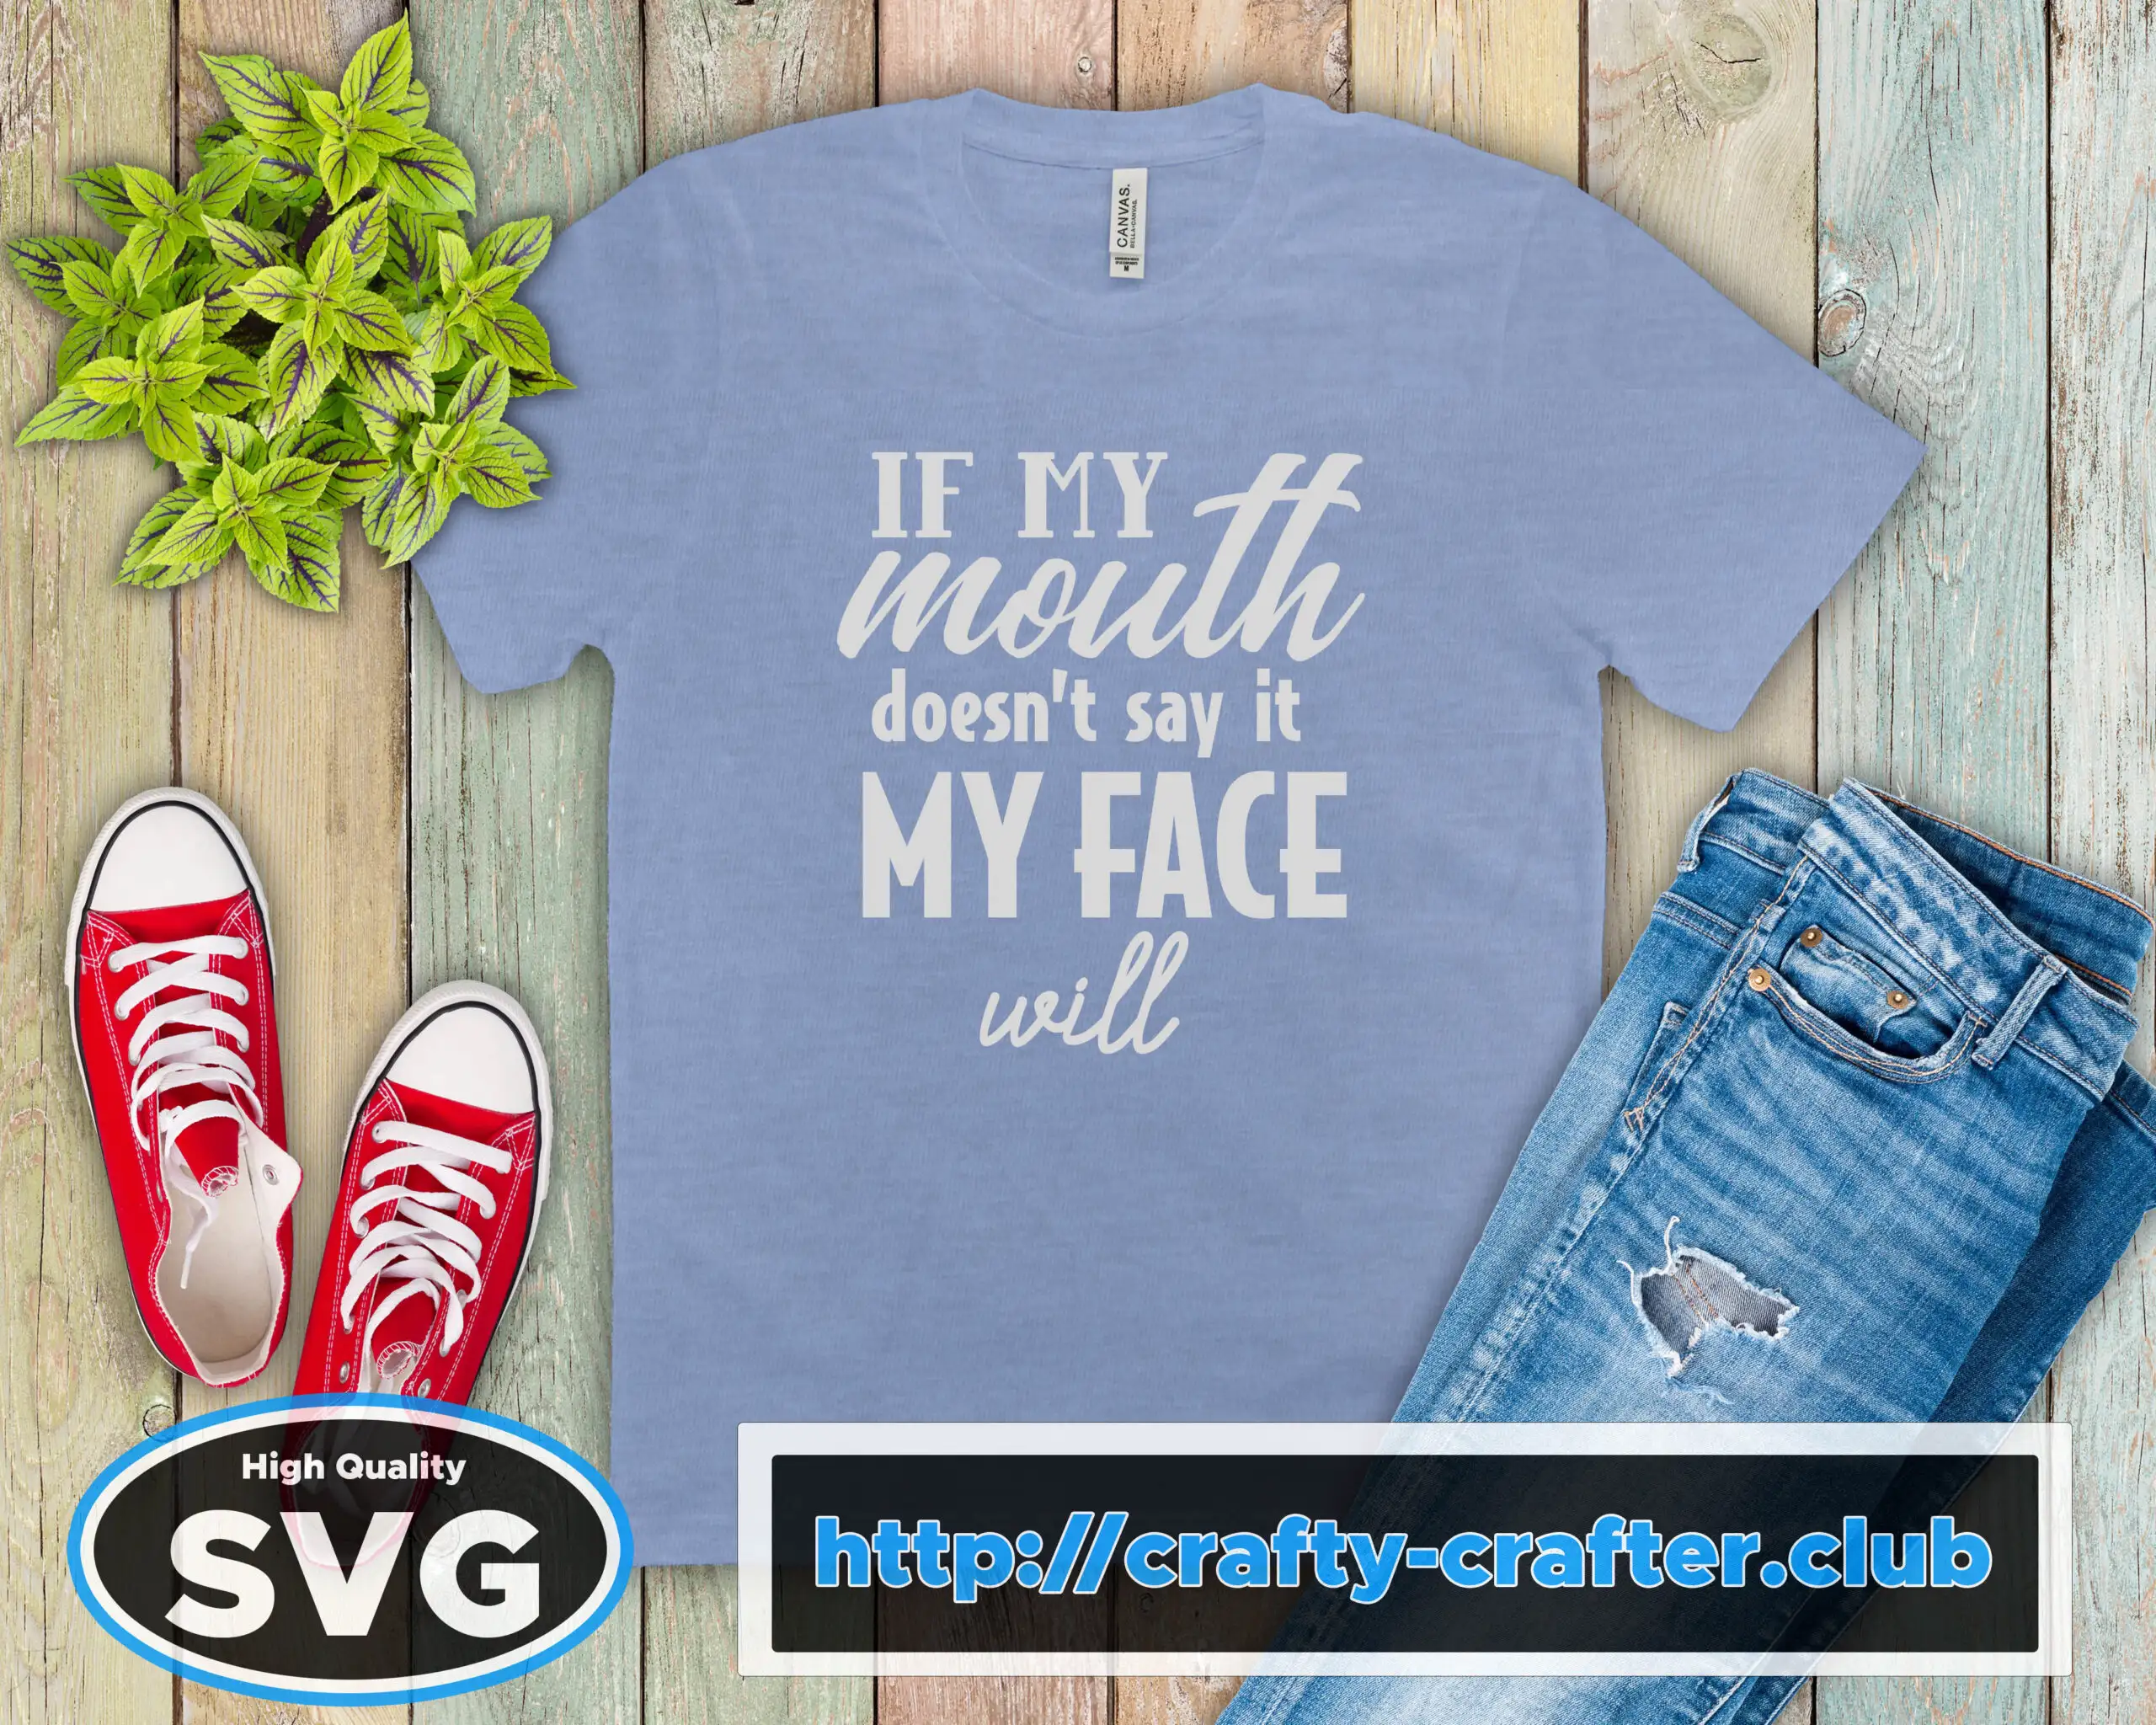 Free My Face Will SVG Cutting File for the Cricut.